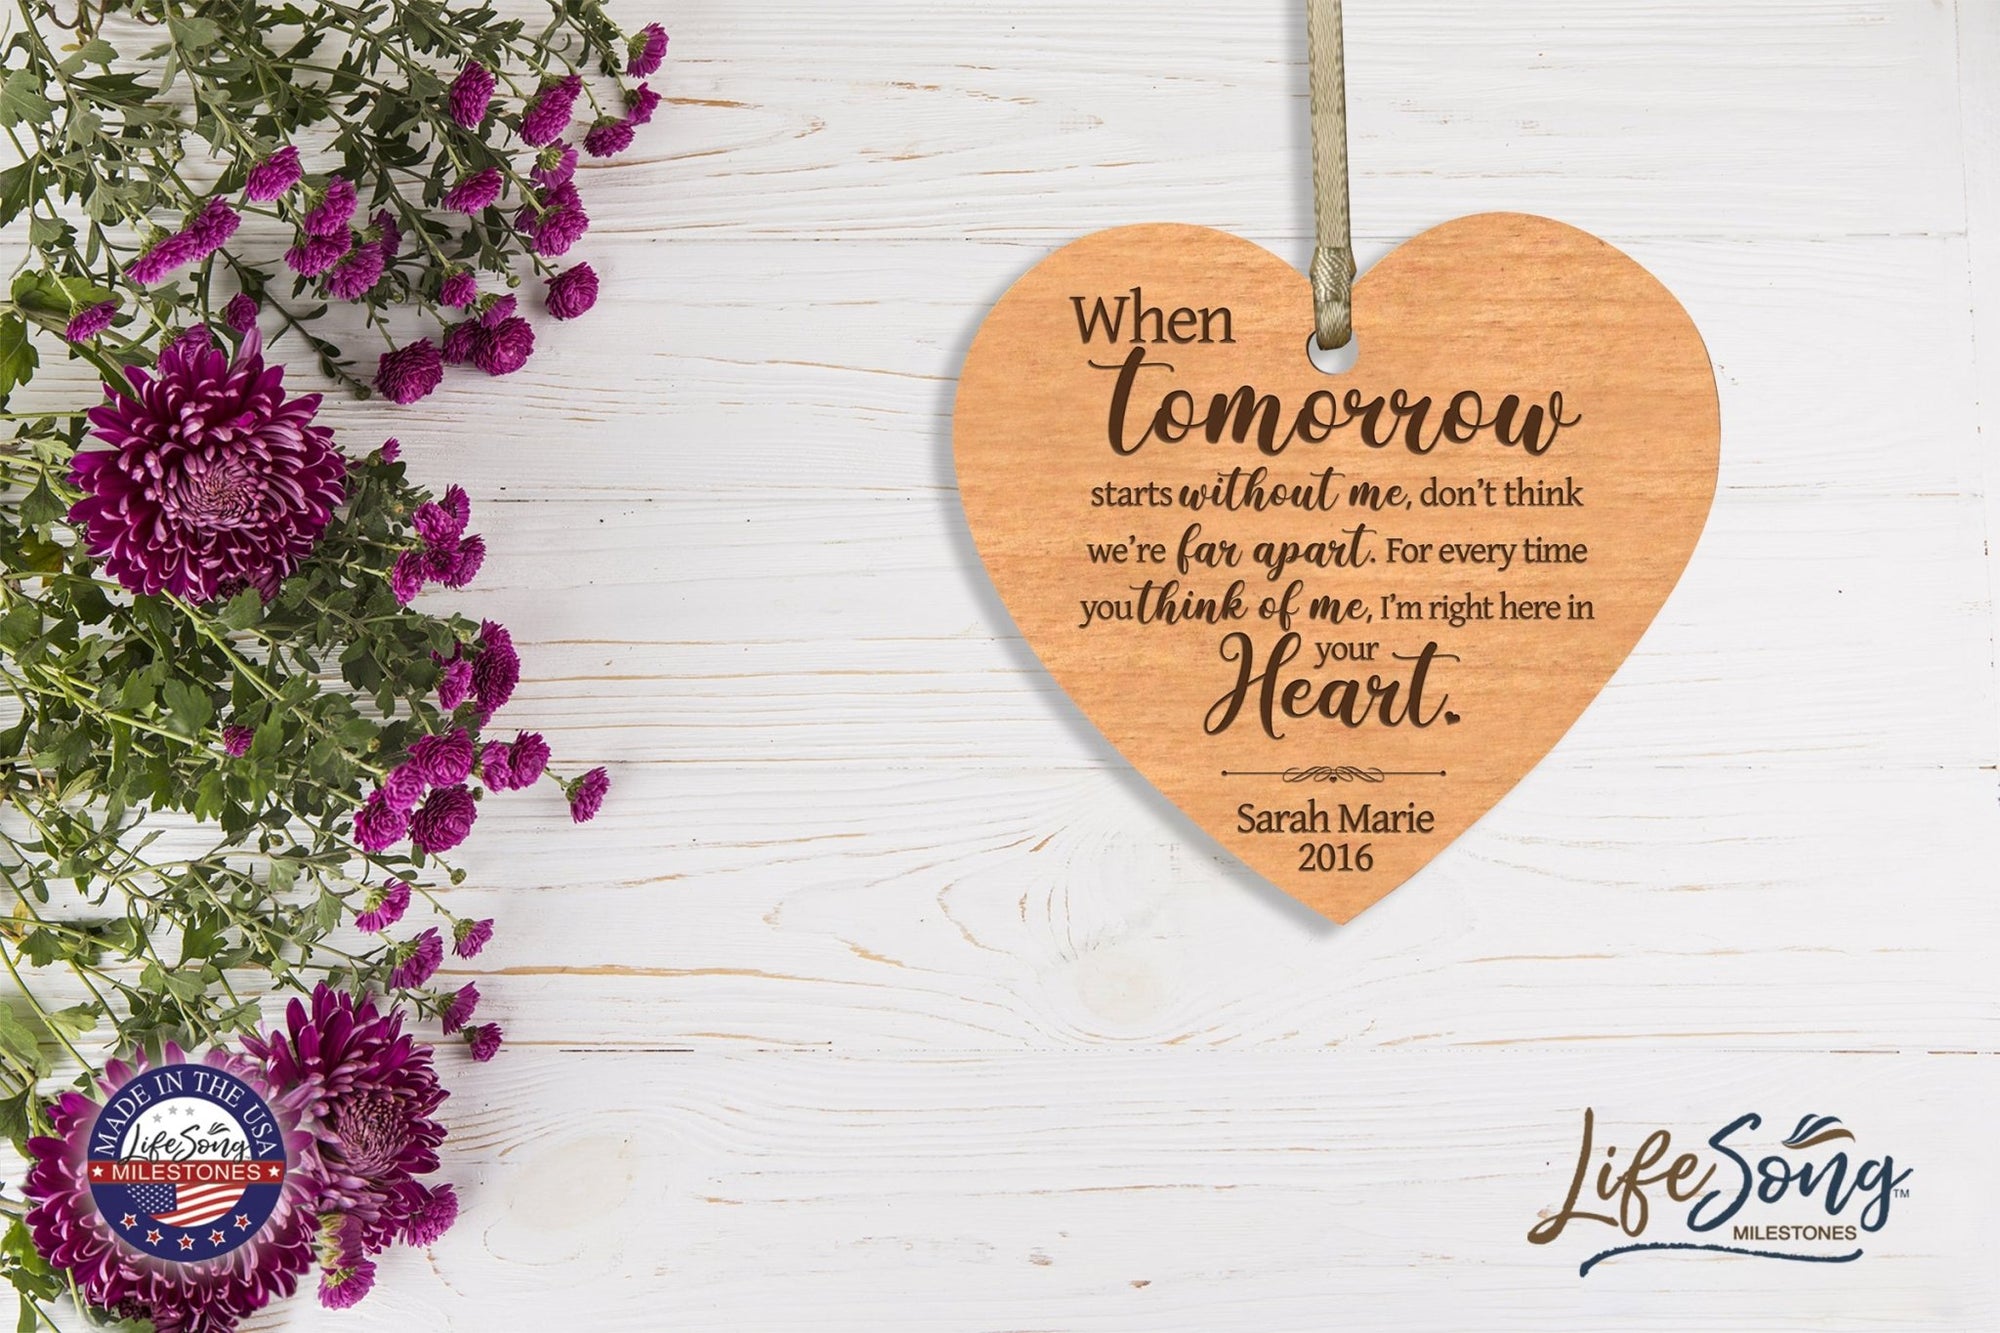 Personalized Engraved Heart Memorial Ornament - When Tomorrow Starts - LifeSong Milestones